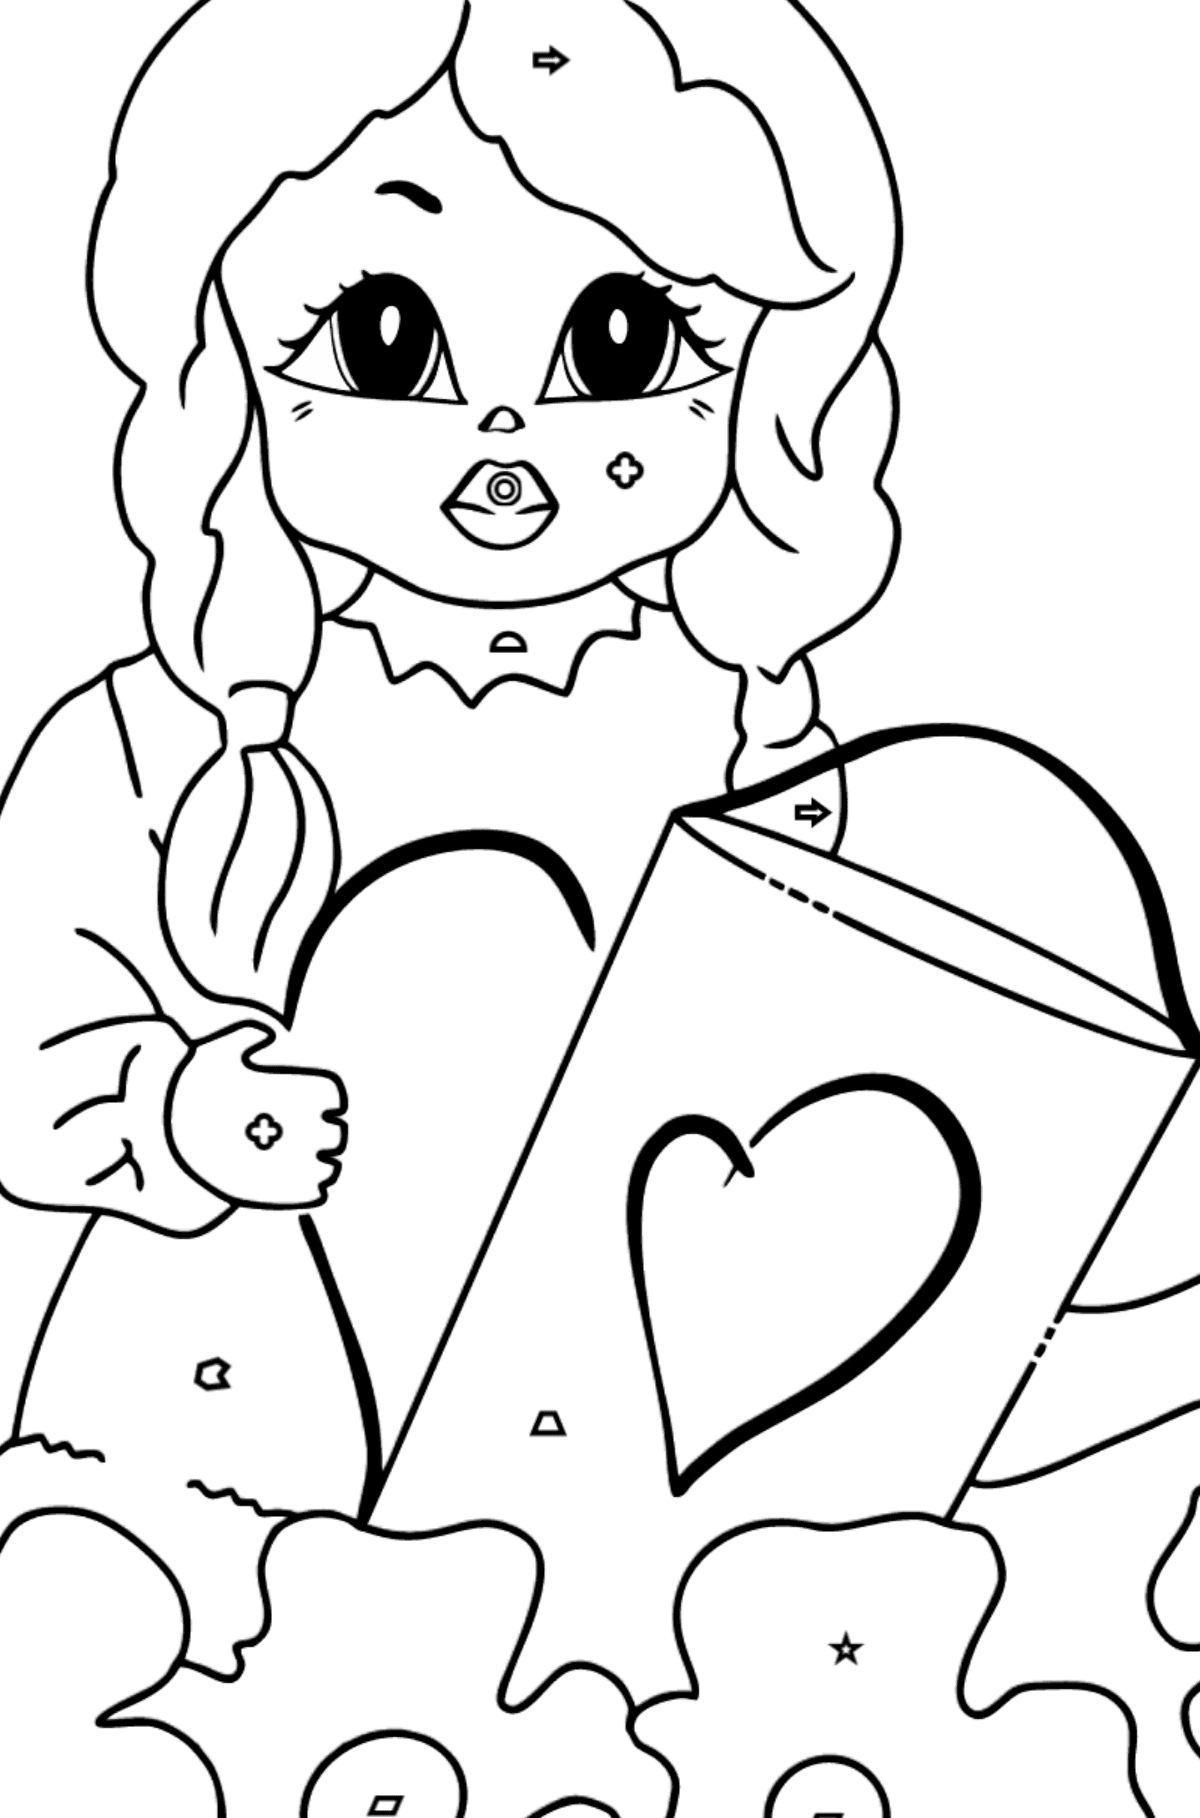 Coloring Picture - A Princess with a Watering Can - Coloring by Geometric Shapes for Kids